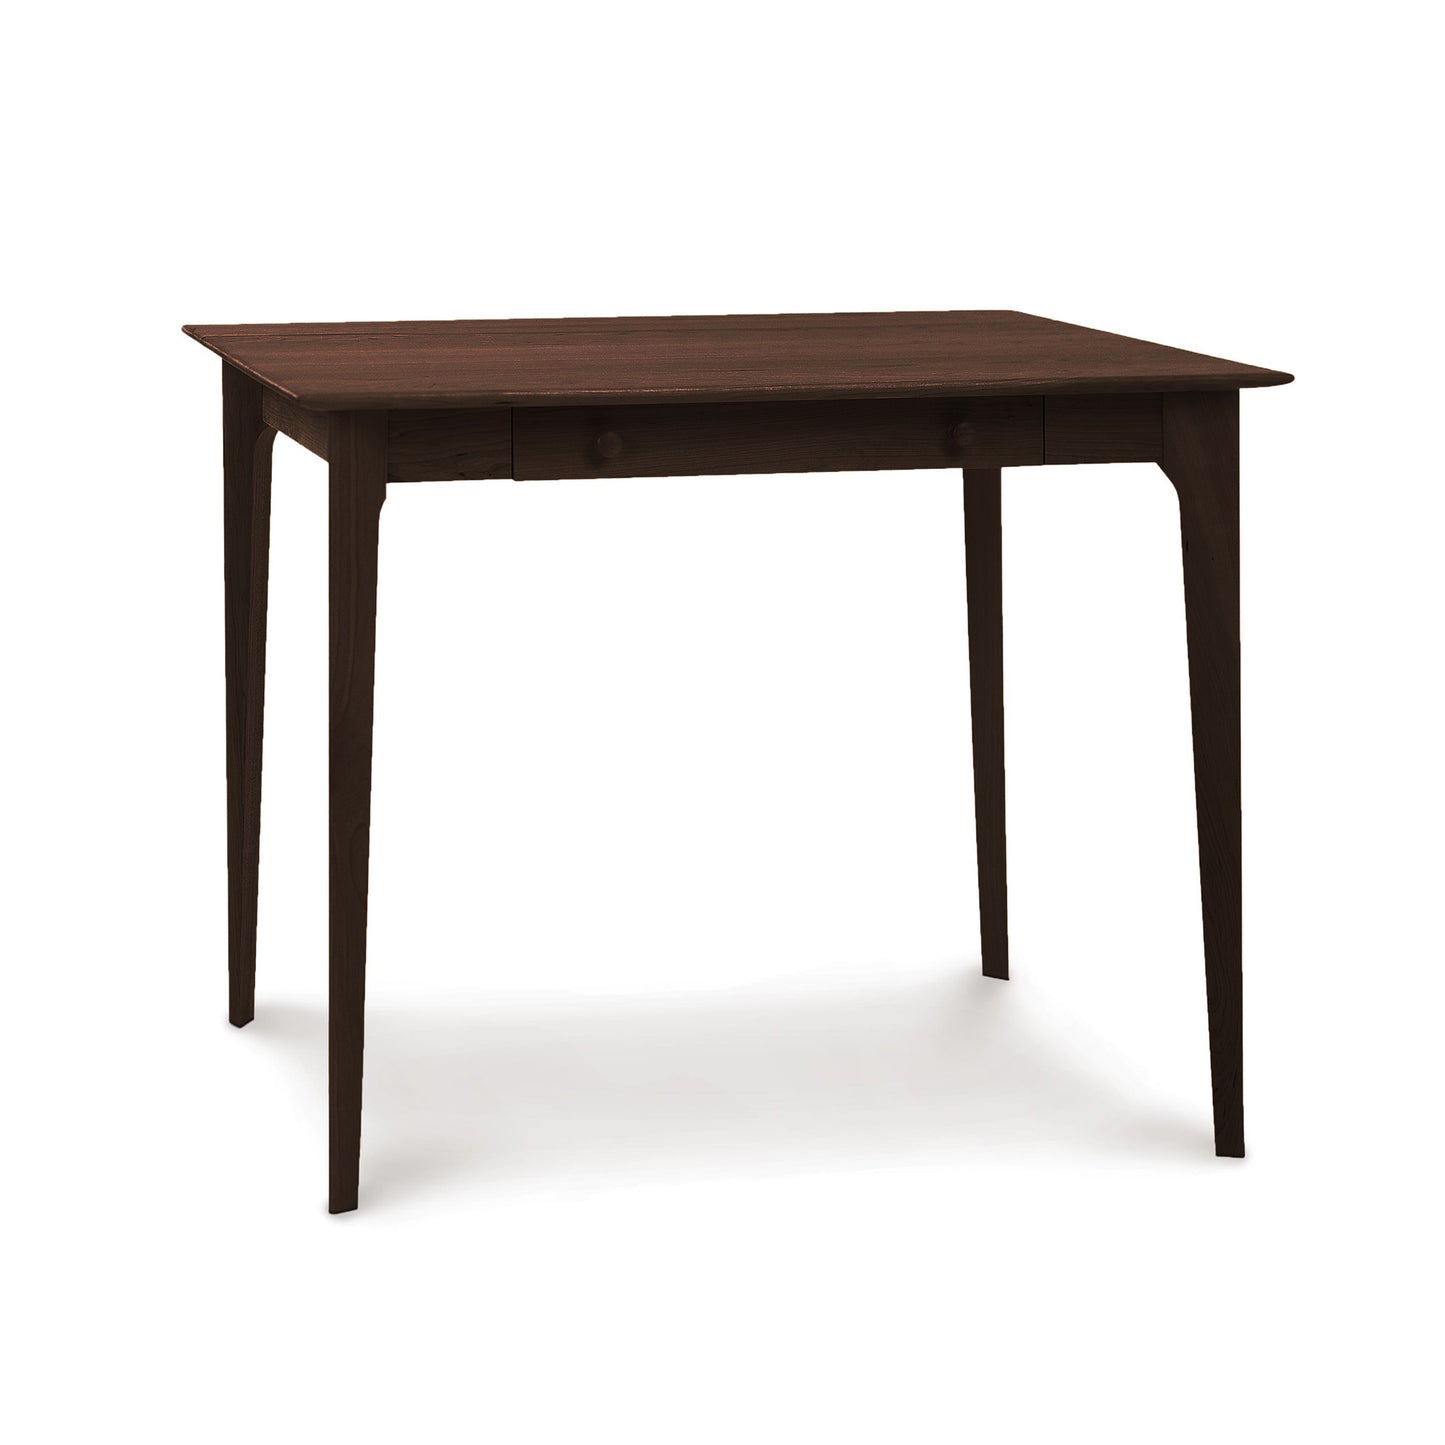 A simple, brown wooden Sarah Secretary Desk with four legs, against a white background, from the Copeland Furniture Home Office Furniture Collection.